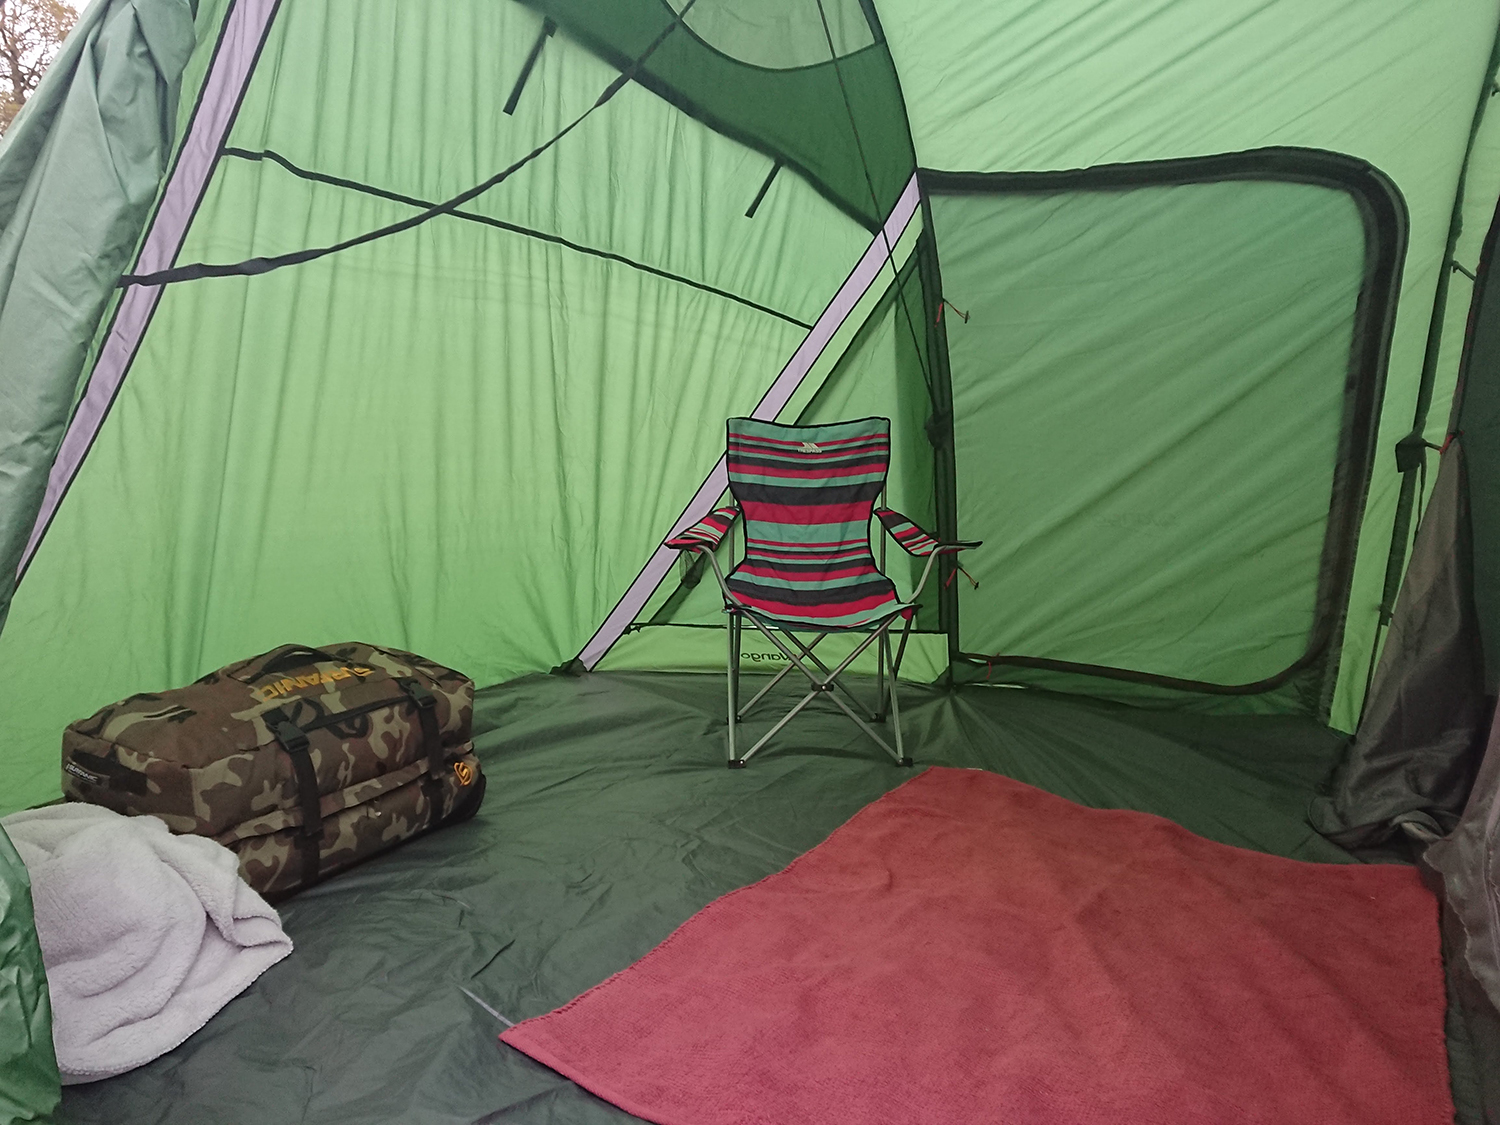 Living area inside the tent